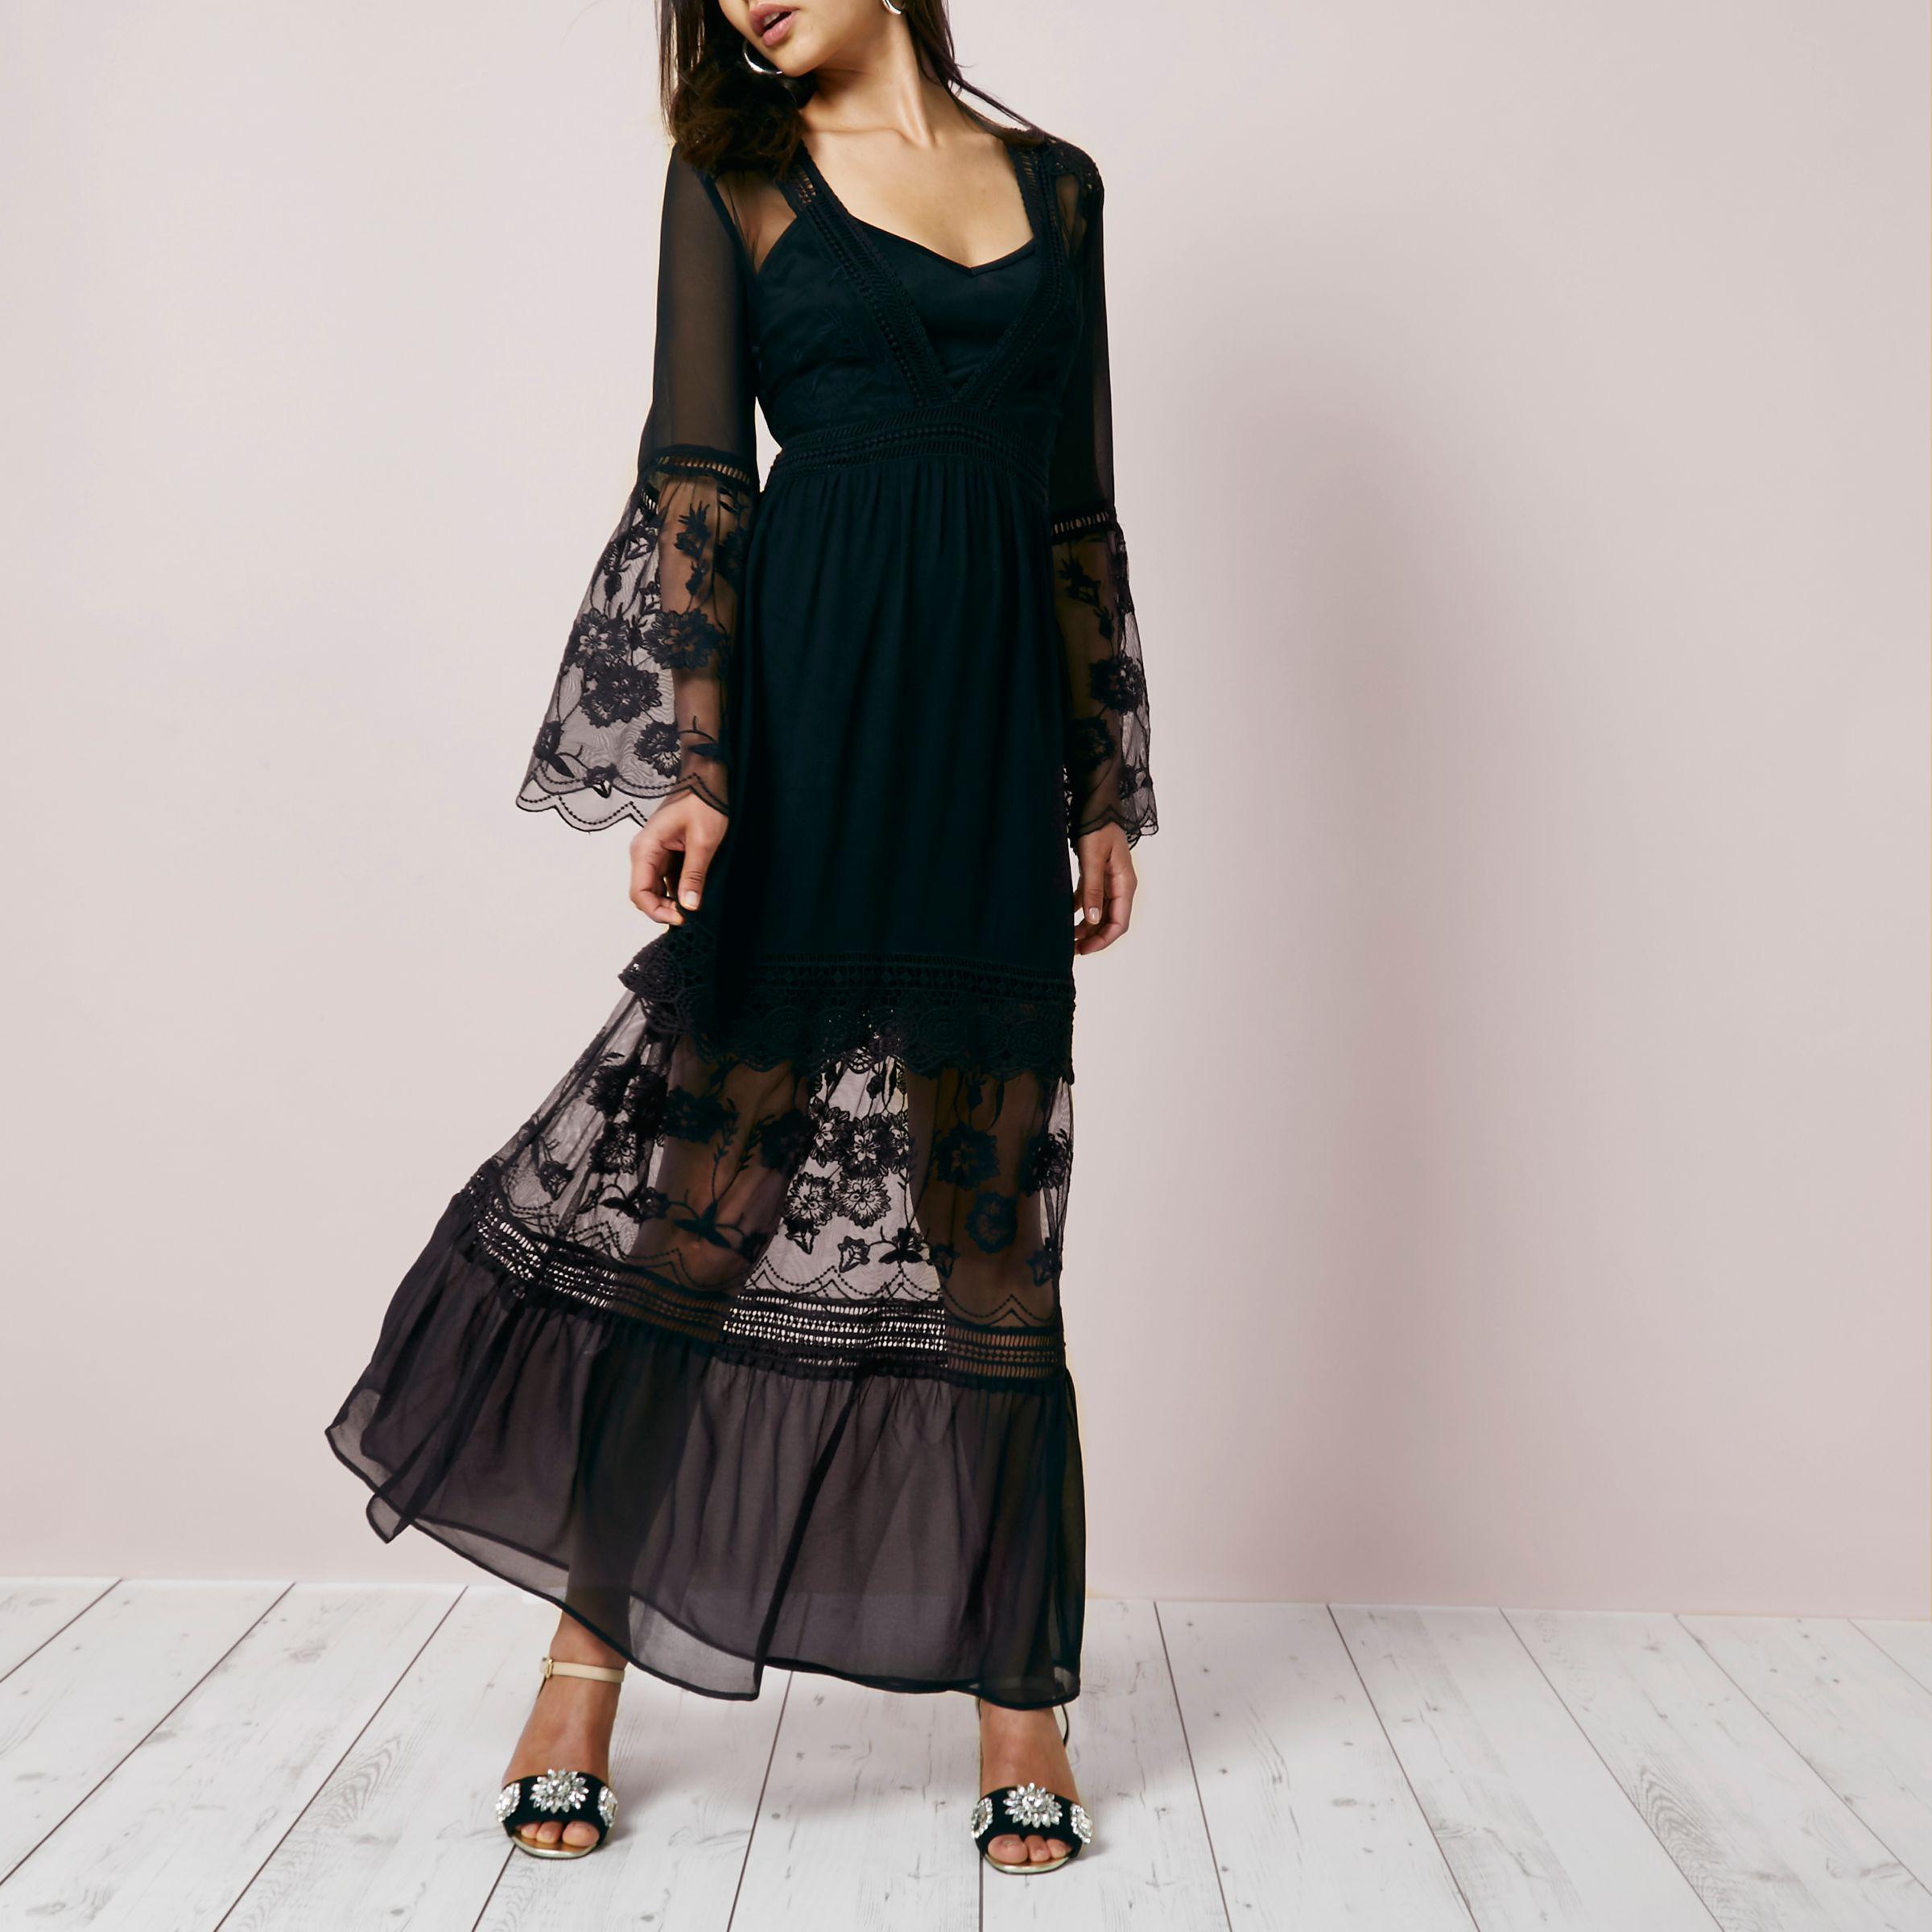 River Island Lace Bell Sleeve Maxi Dress in Black | Lyst